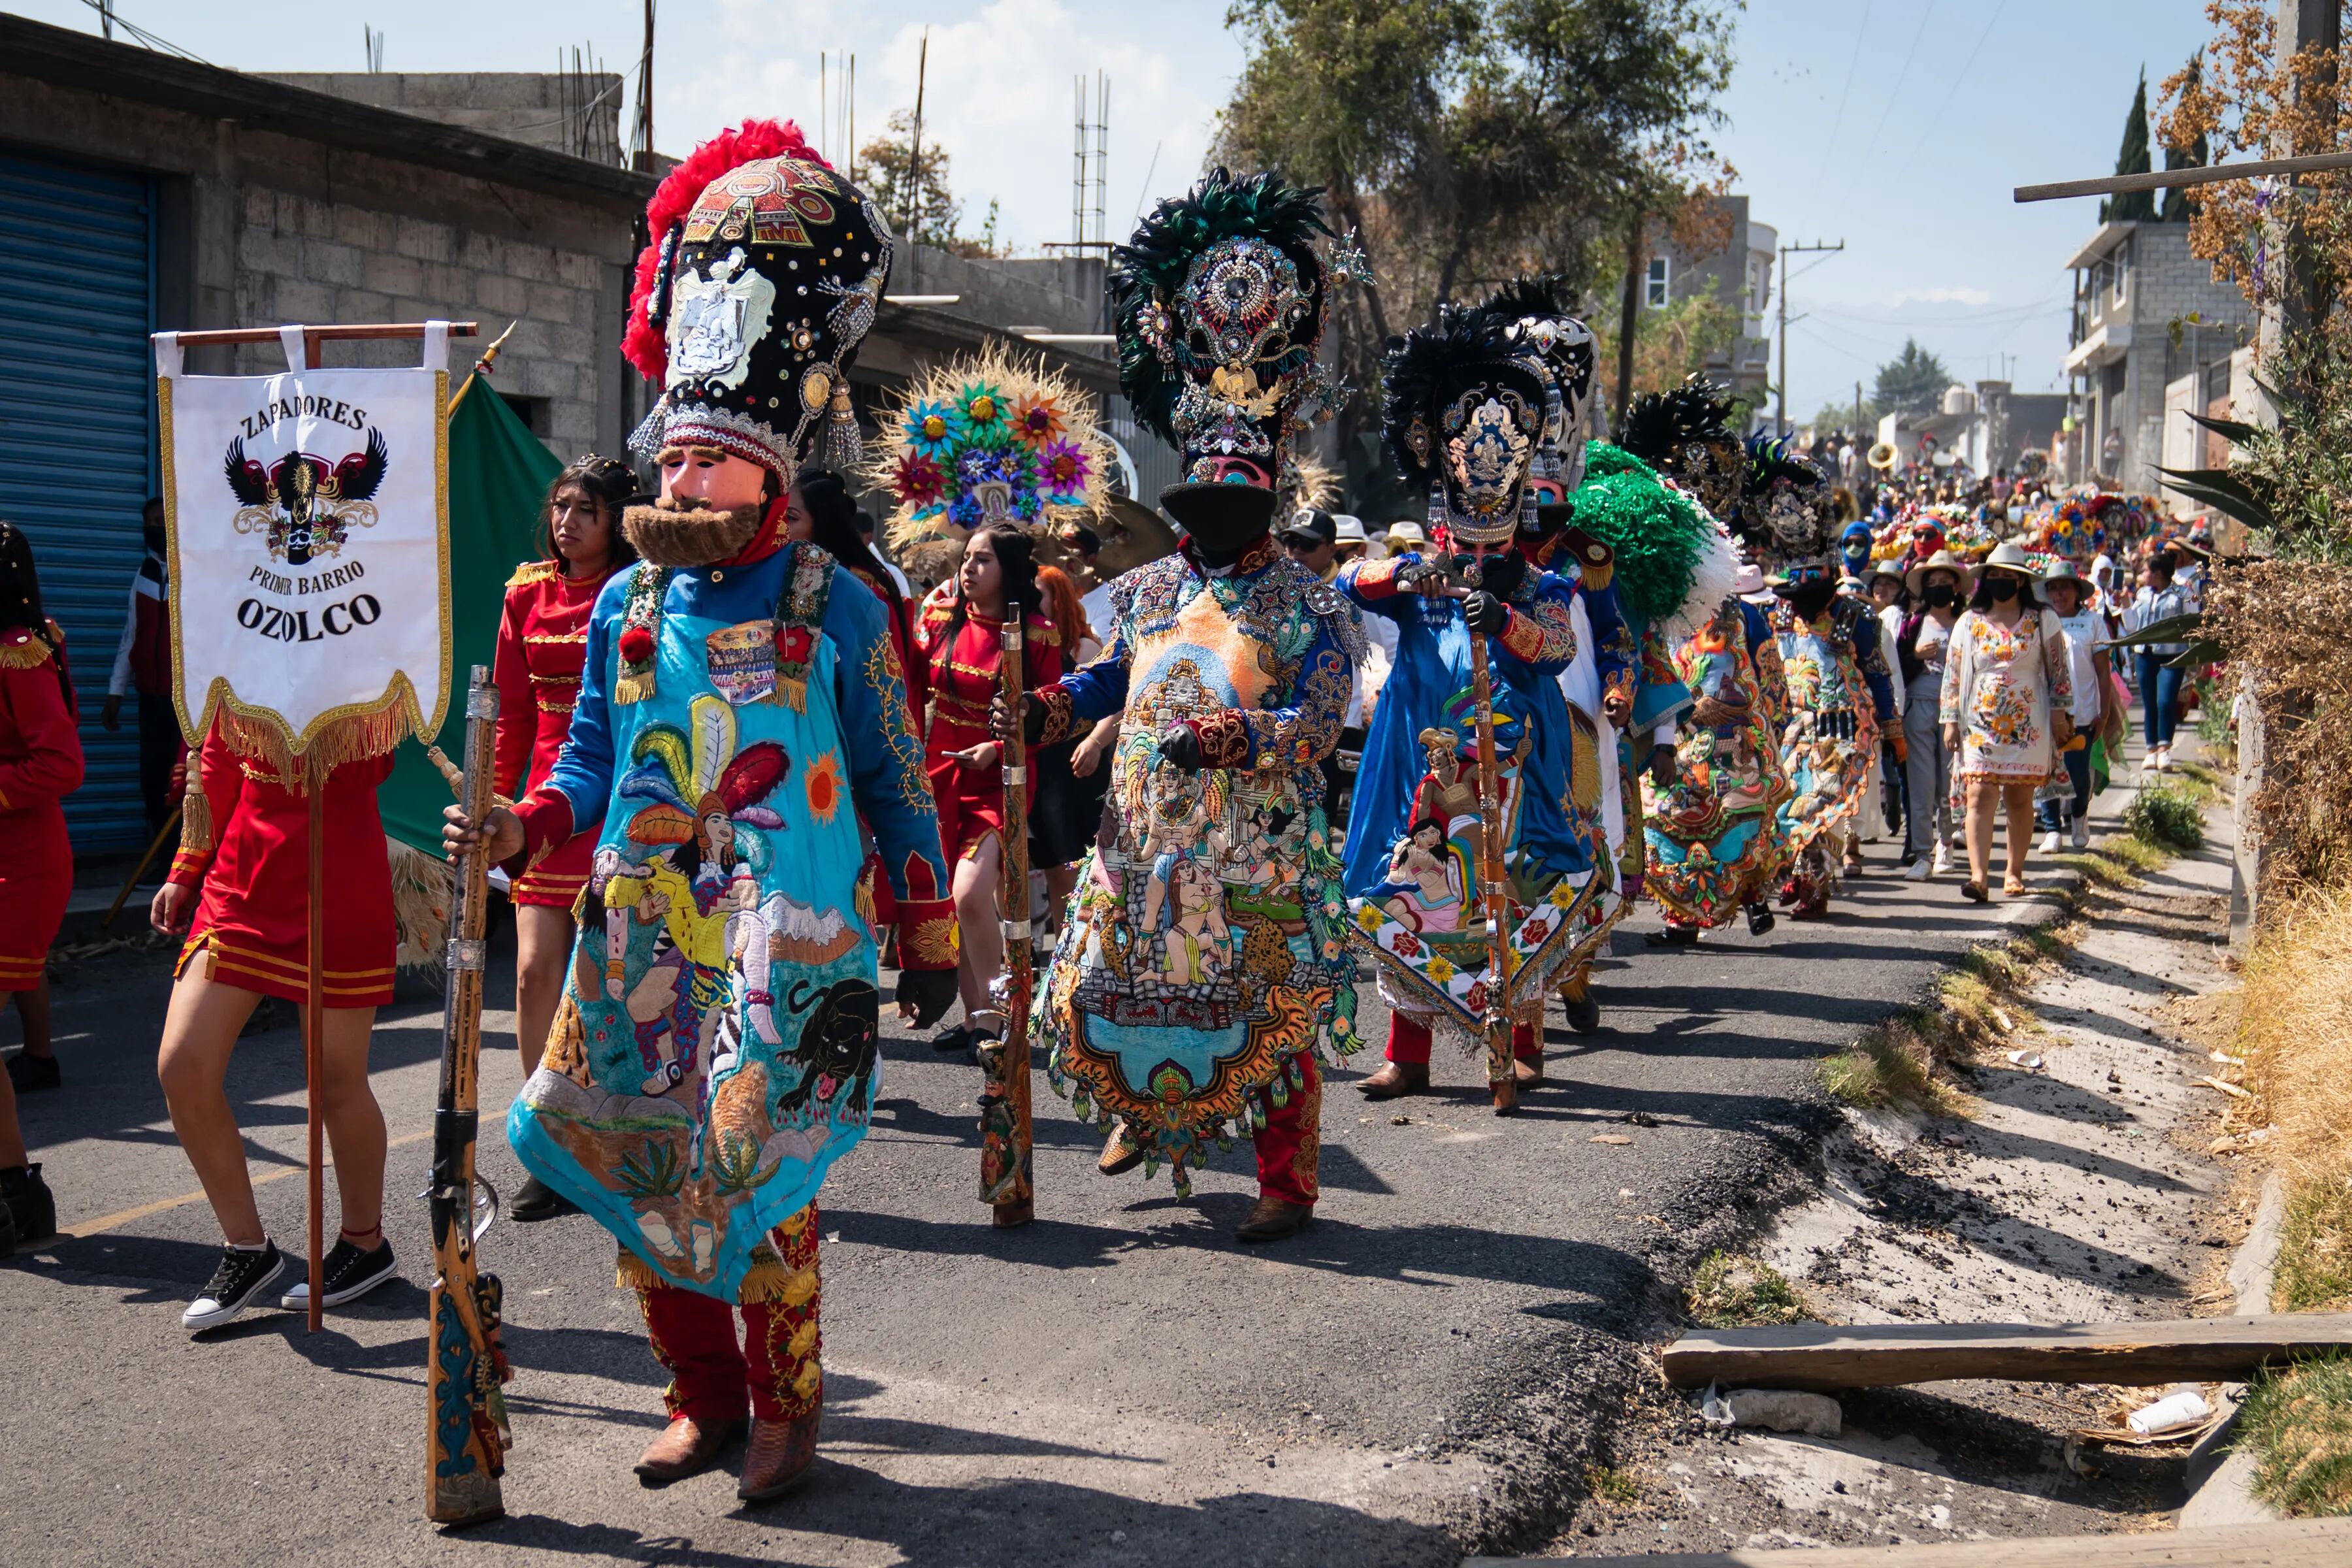 The largest Carnaval de Puebla on the East Coast takes place in  Philadelphia on Sunday